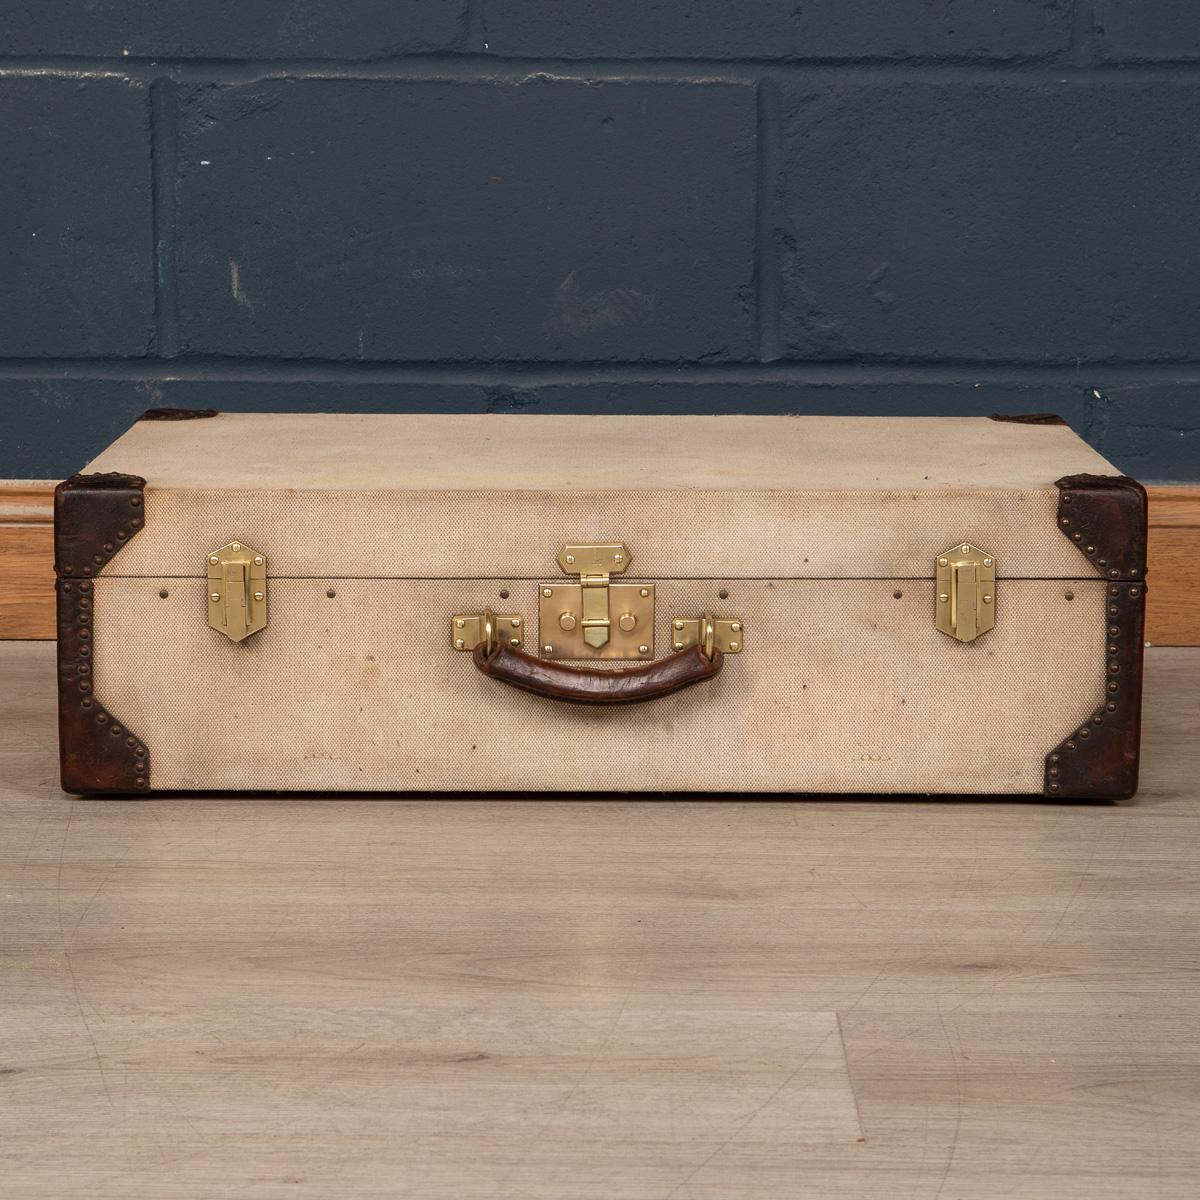 A very rare Hermes suitcase in canvas covering, leather reinforced edging with brass locks and side latches, made in France in the early part of the 20th century. A great addition to any collection and a fantastic item to have as part of a stack in